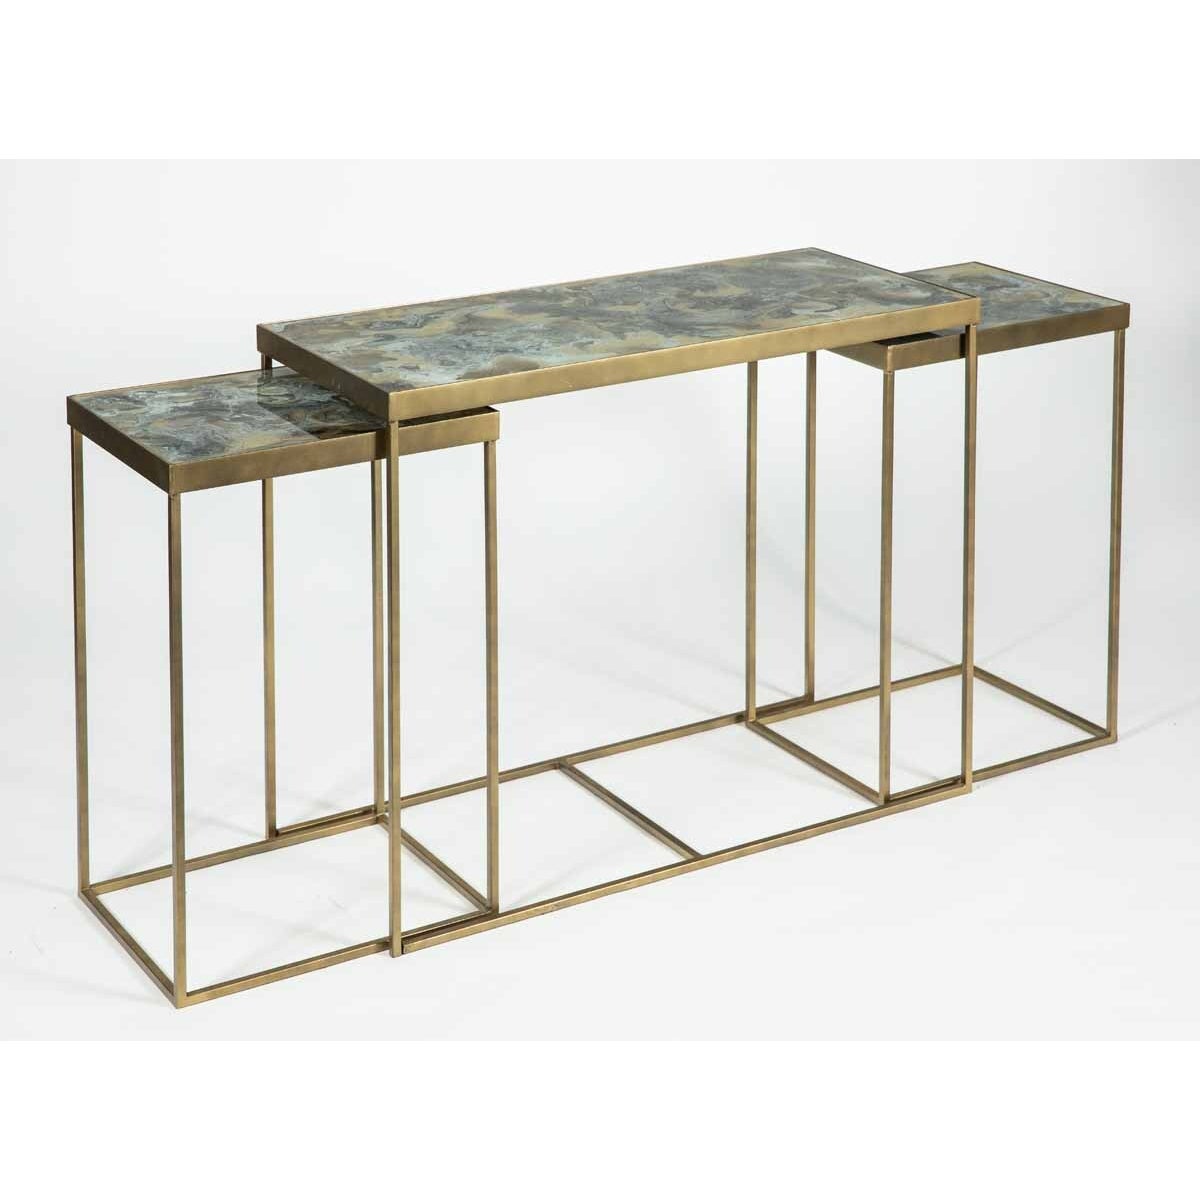 Louis Nesting Console Tables Set of 3 in Antique Brass with Glass Top in Eureka Finish